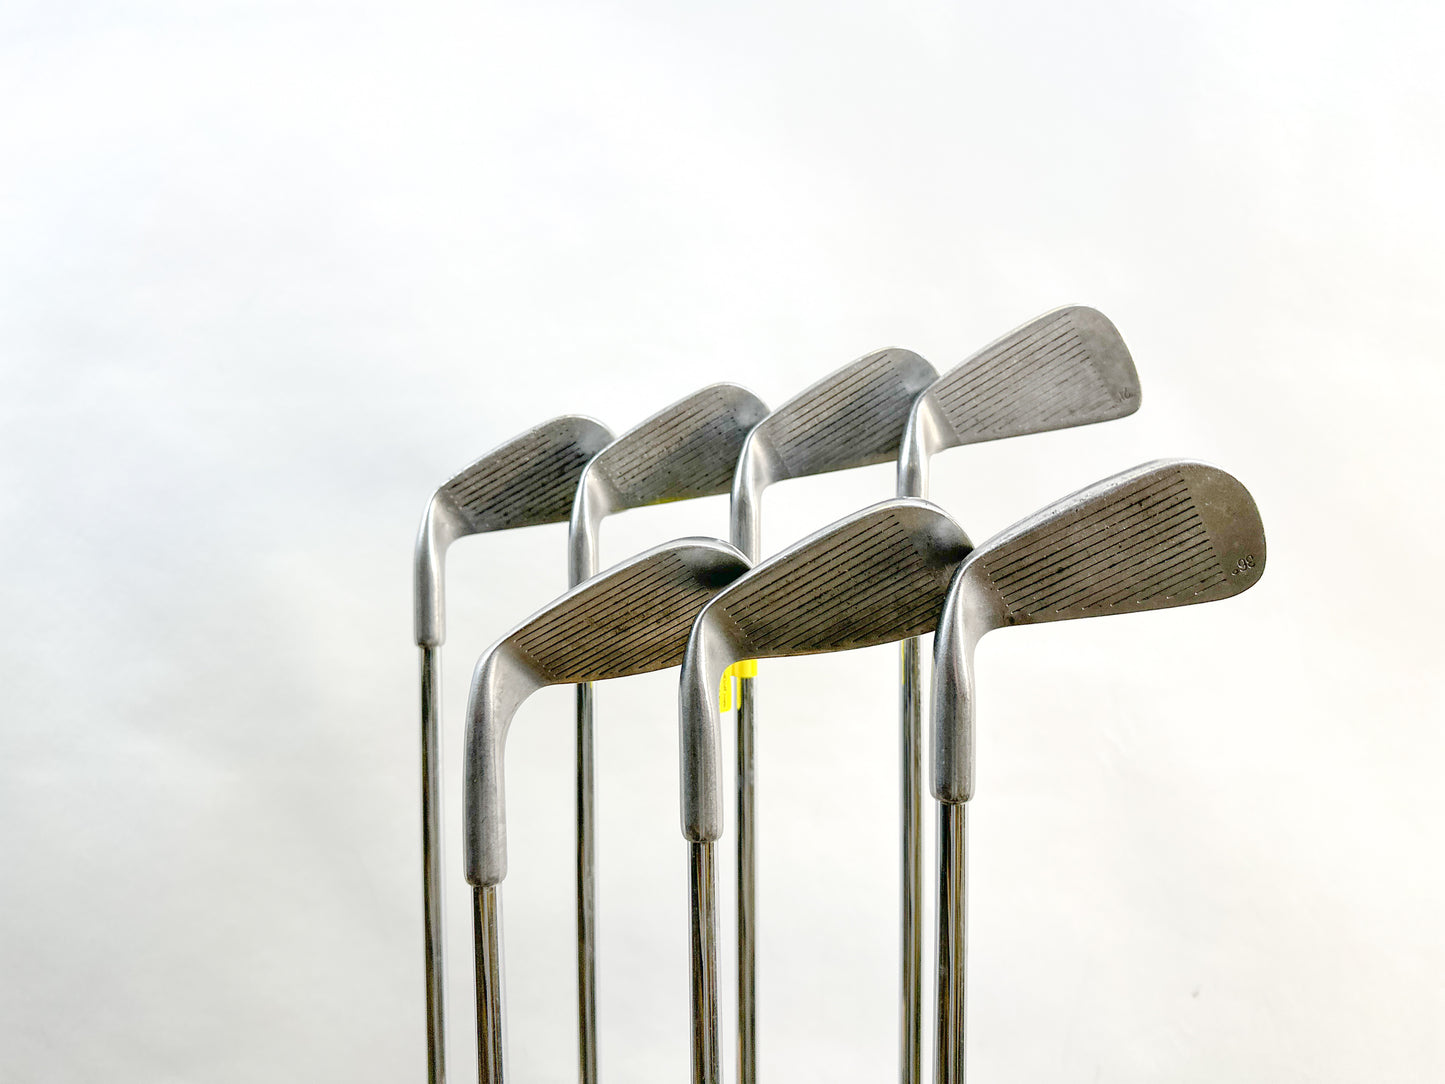 Used Tommy Armour 845s SILVER SCOT Iron Set - Right-Handed - 3-8, PW - Regular Flex-Next Round